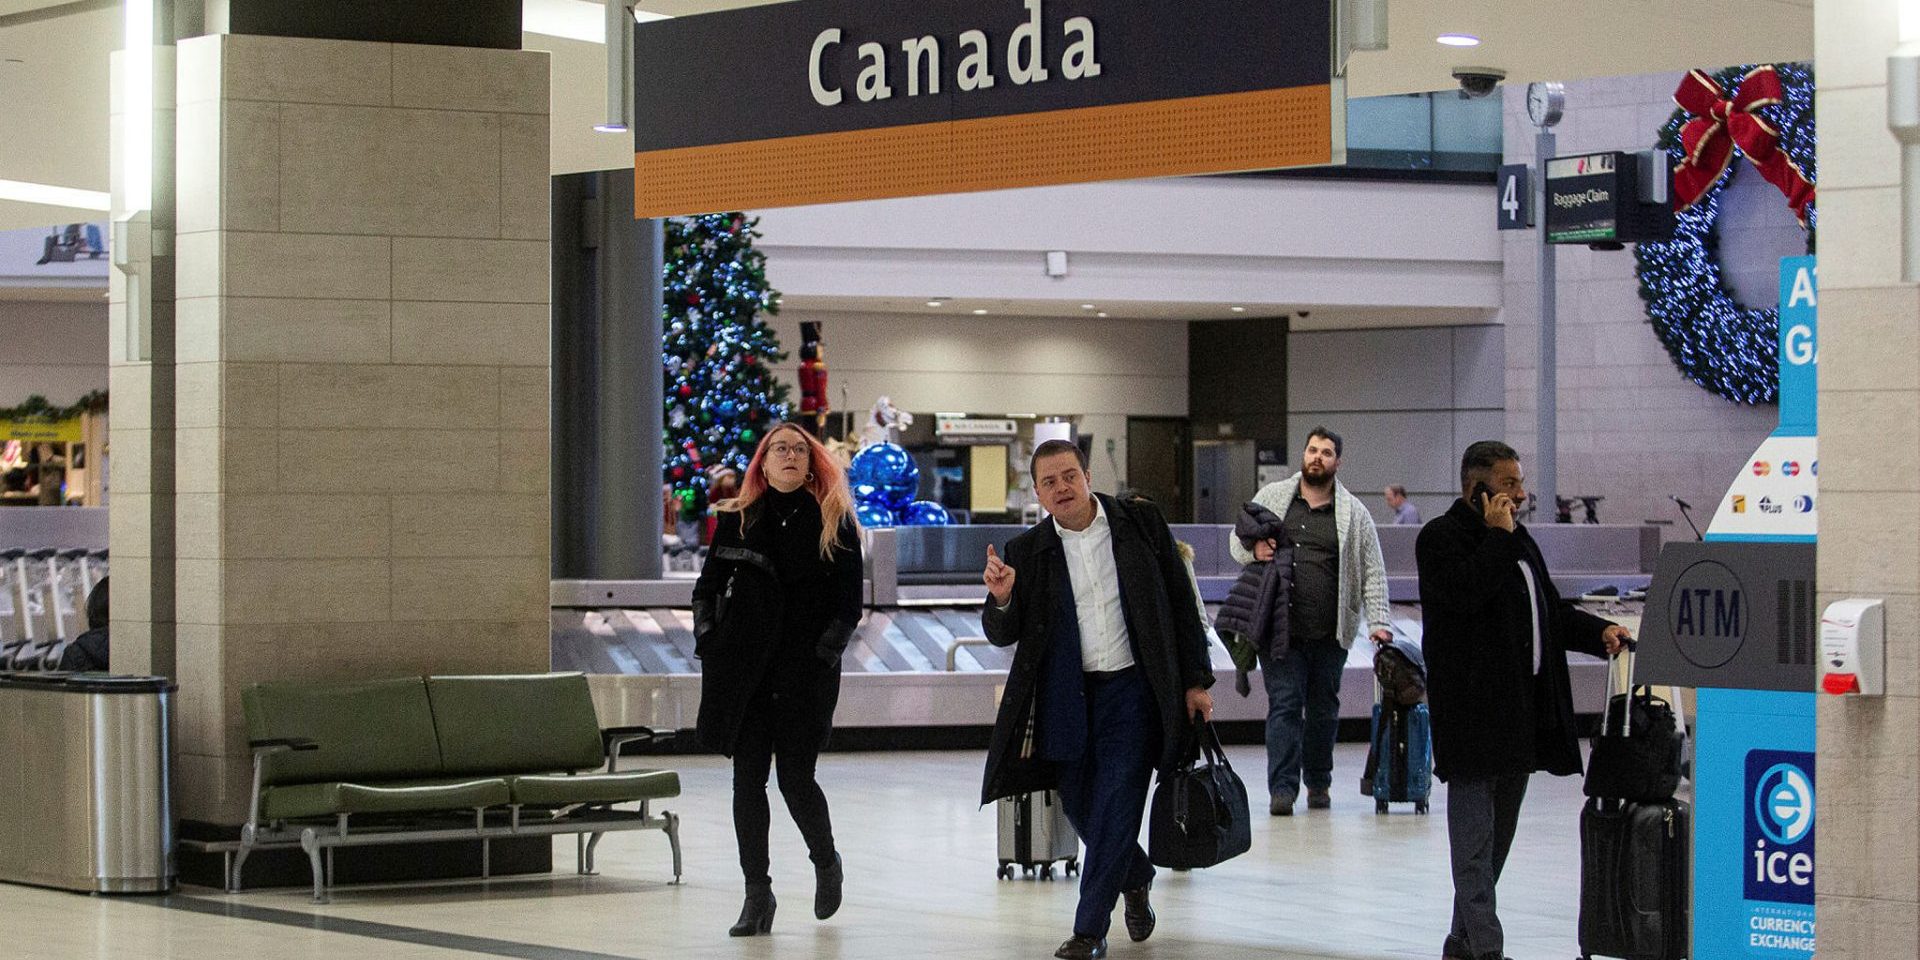 Travellers pass through the arrivals gate at the Ottawa Macdonald-Cartier International Airport on Nov. 28, 2022.  Andrew Meade